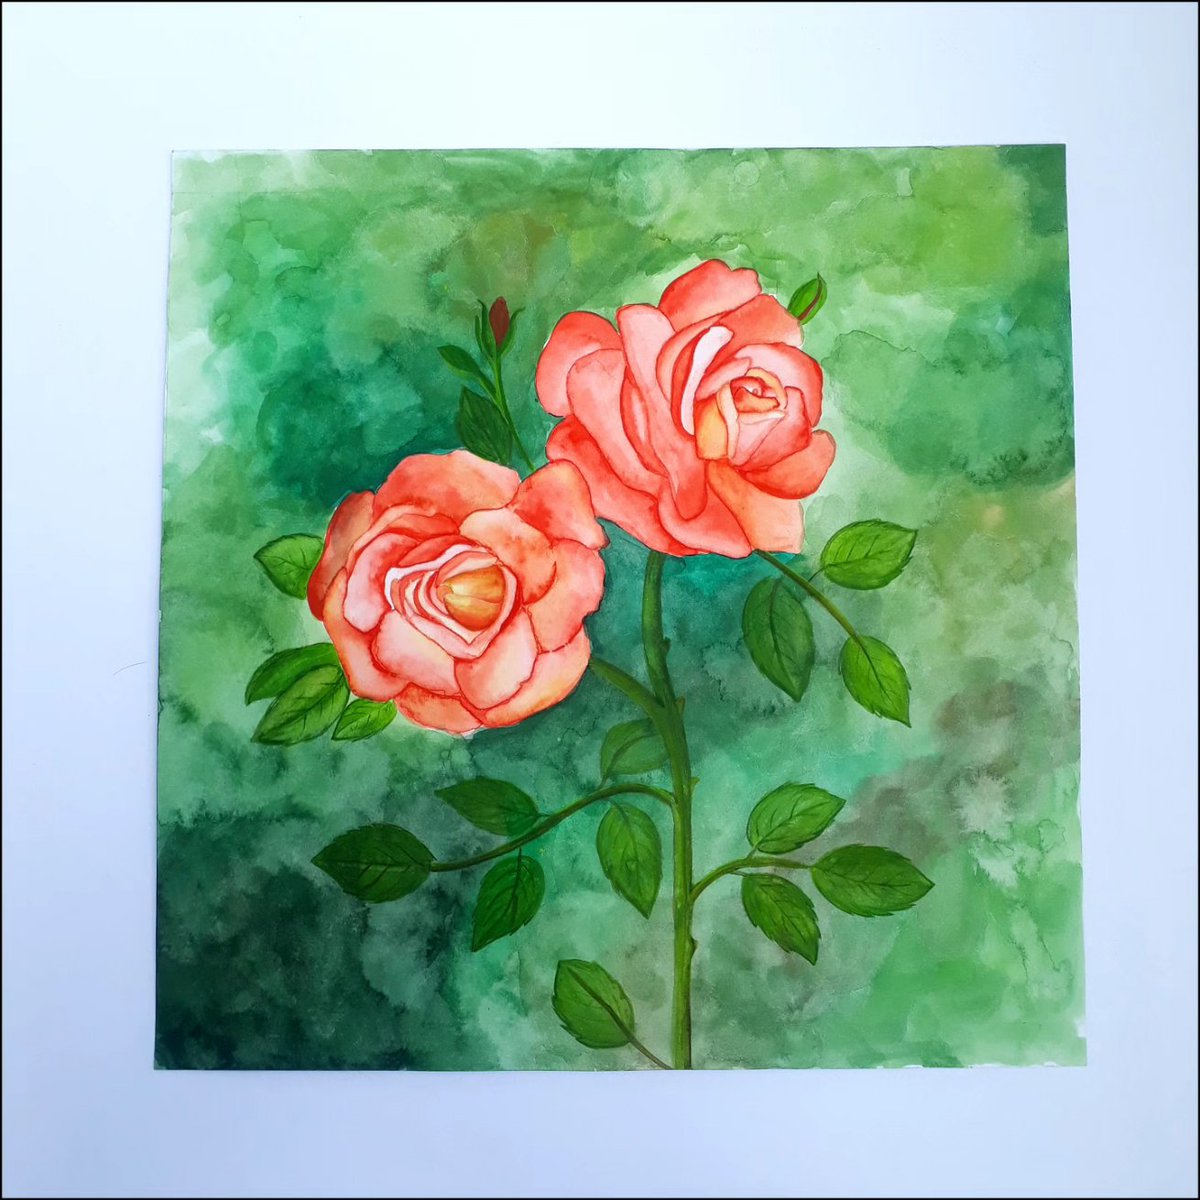 Twin rose🌹
.
Water colour painting 🖌️🎨
.
.
.
.
#rolloartgallery #rollo #rolloartgallerymeerut #rolloradhika #watercolordrawing #watercoloring #watercolors #waterpainting #watercolorart #watercolourinspiration #watercolor_gallery #rose #rosepainting #rosewatercolor #art #artist